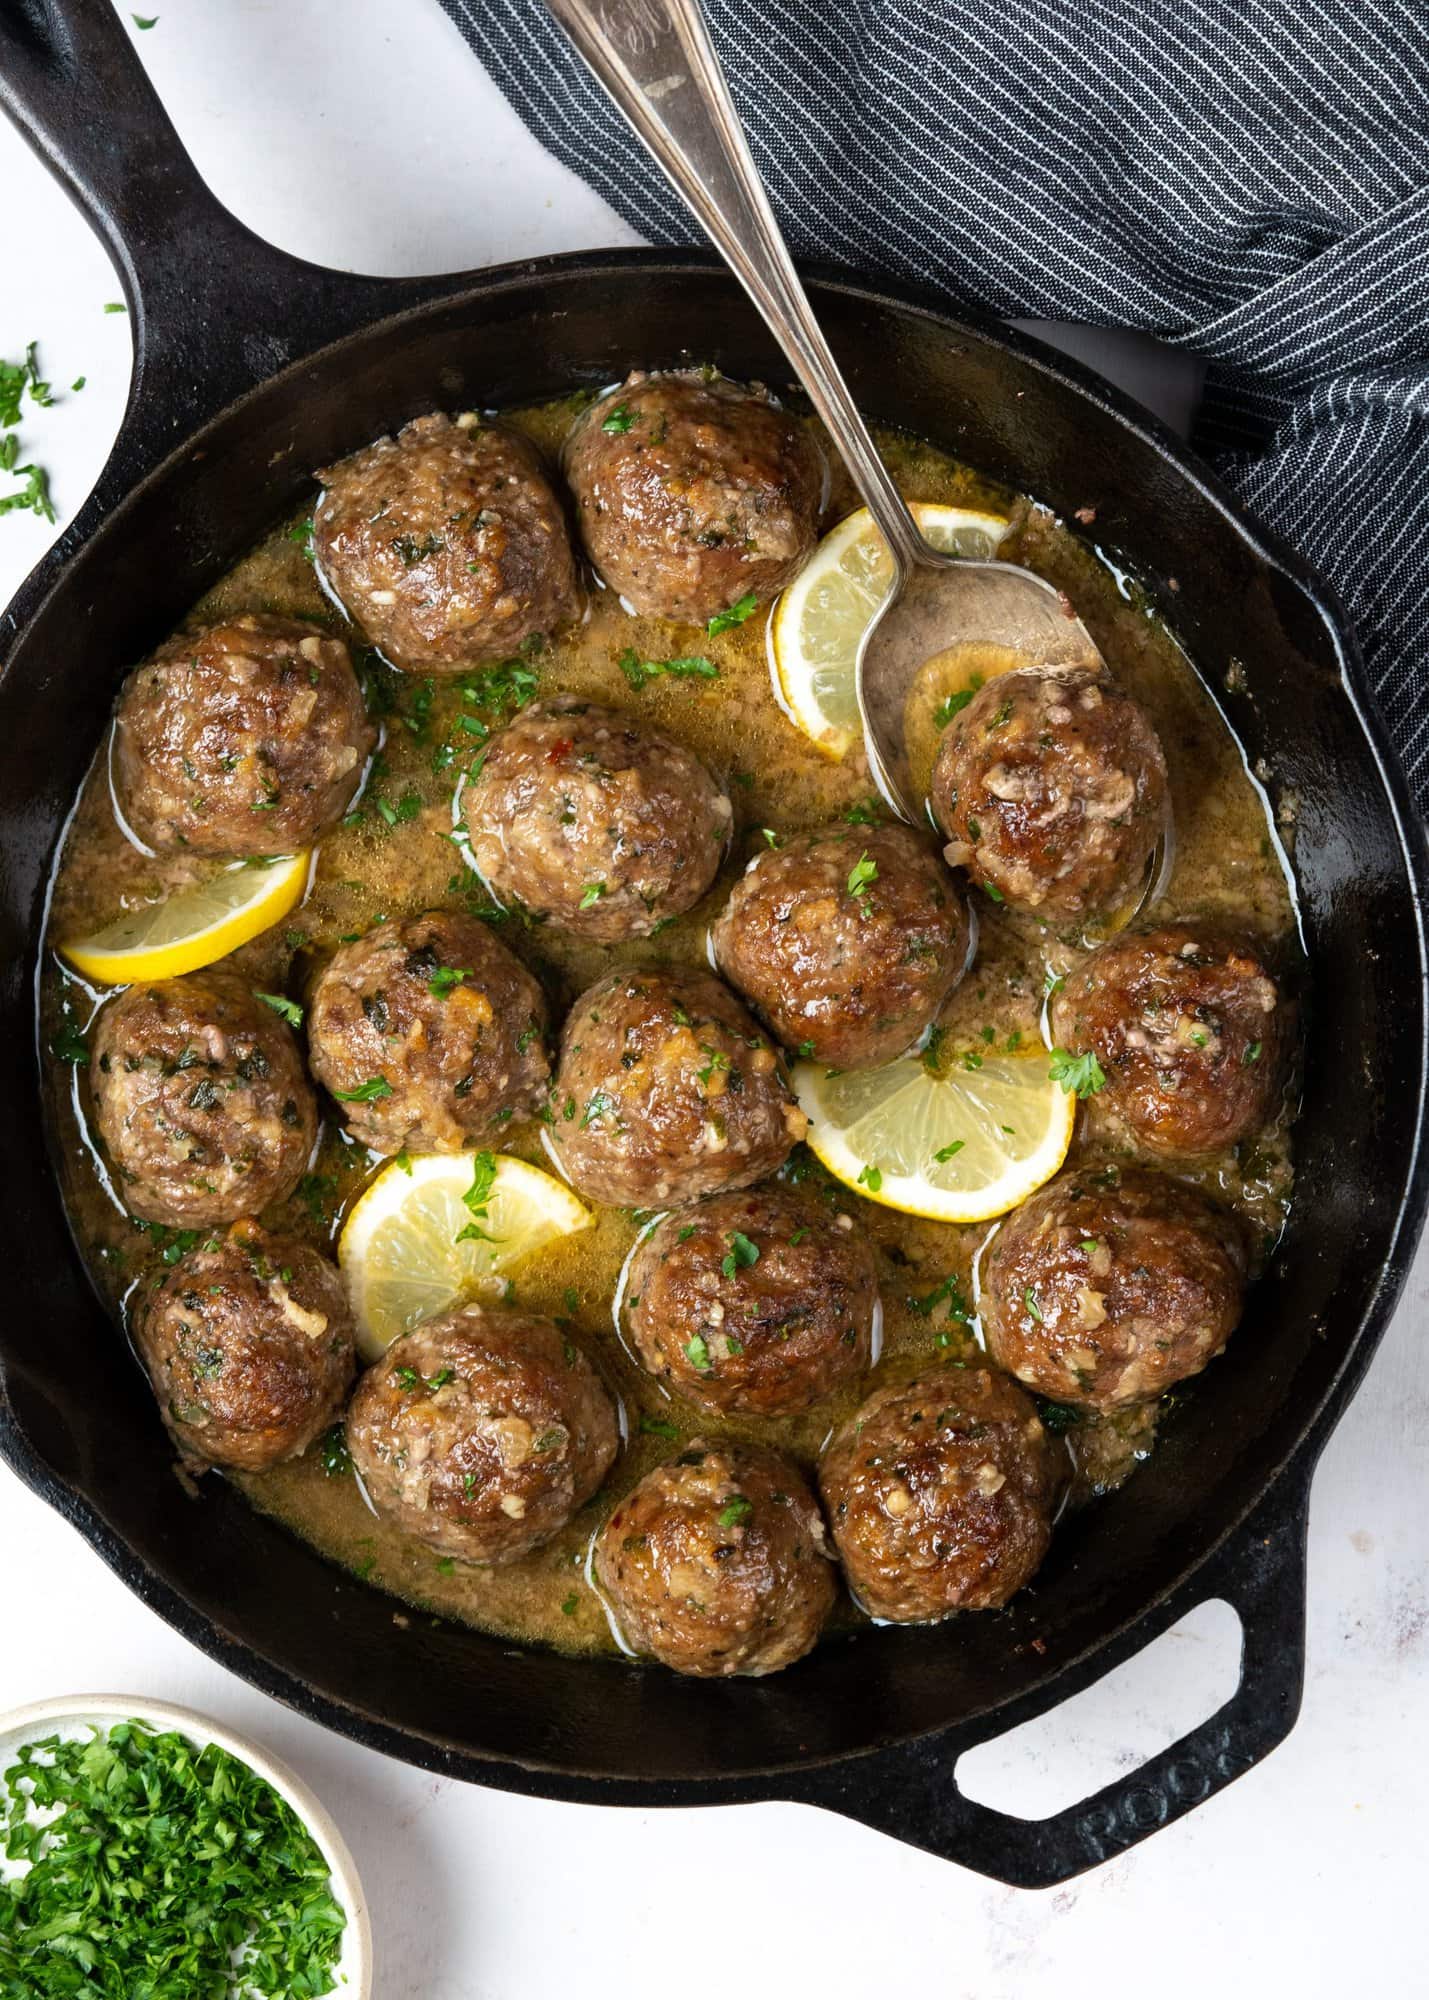 Juicy and tender Baked meatballs made in a butter garlic sauce in a skillet